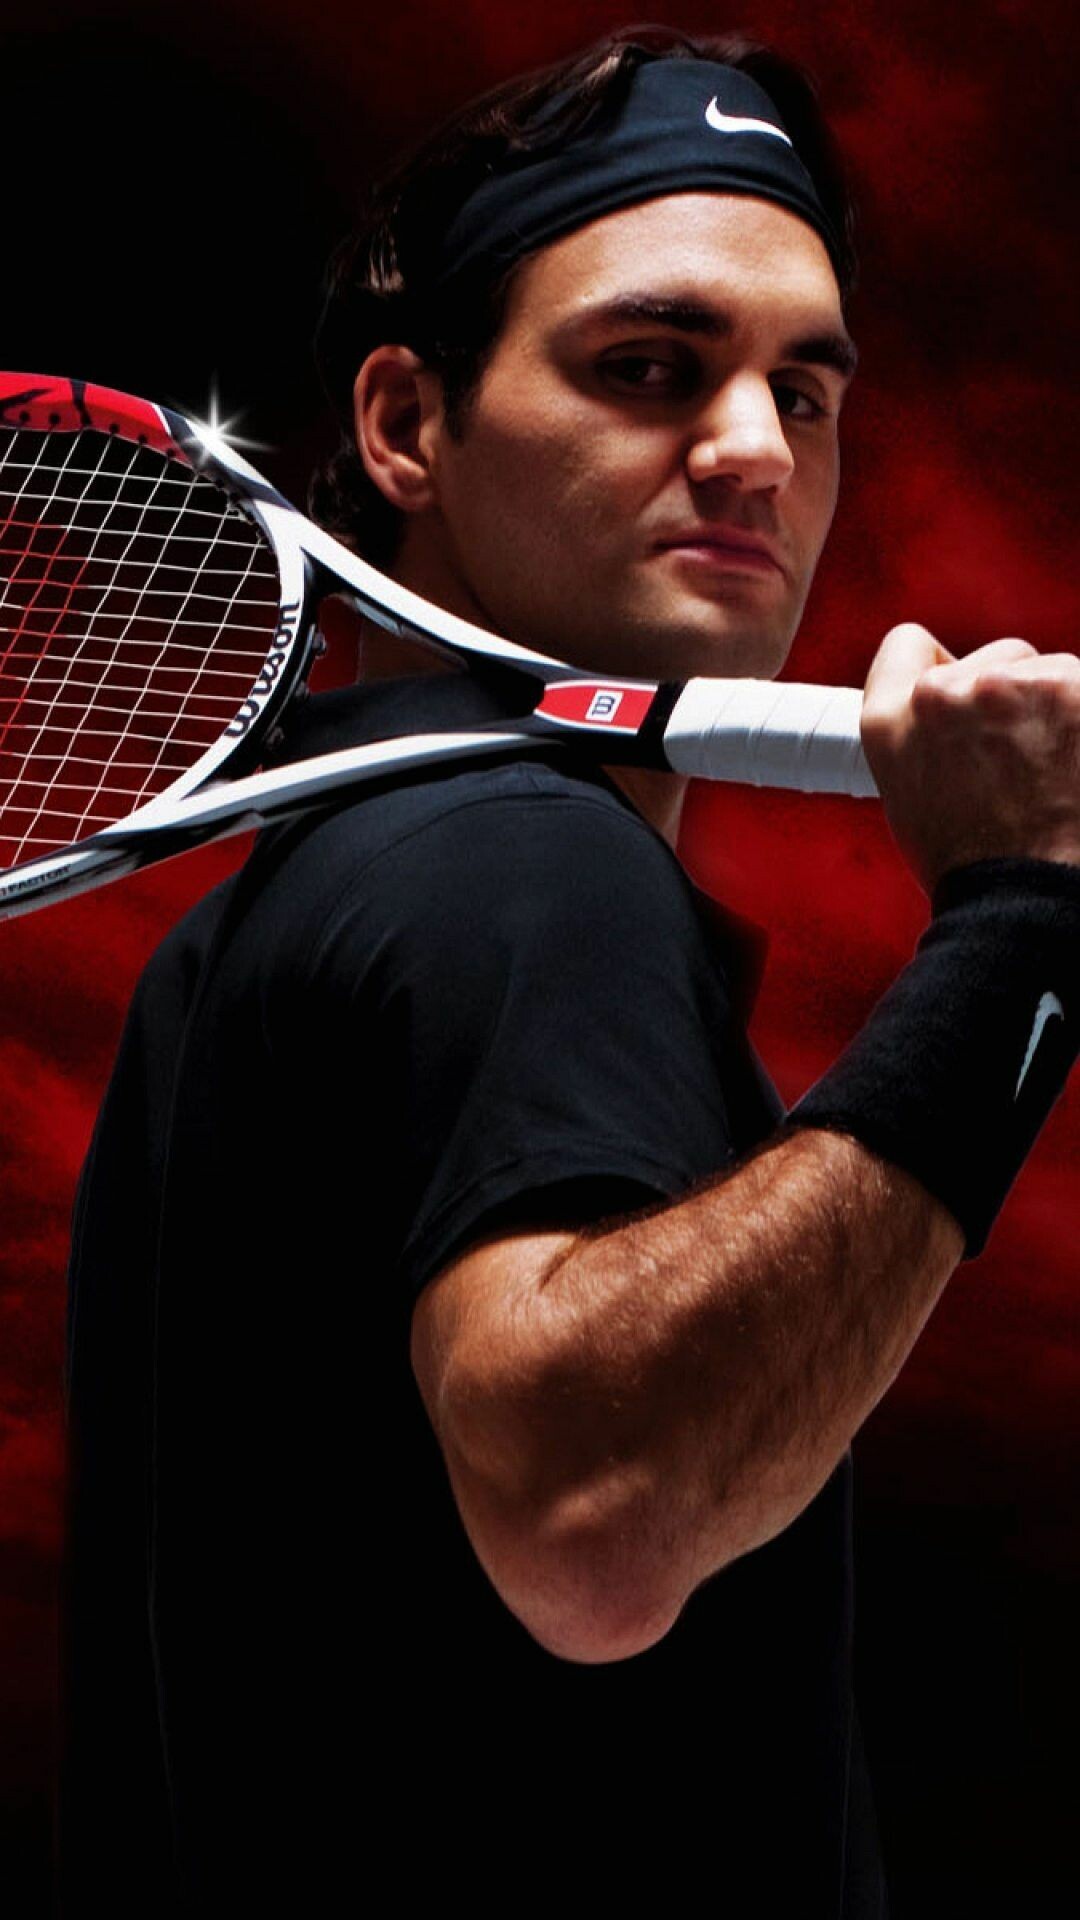 Roger Federer: Tennis champion, won the 2007 Australian Open without dropping a set. 1080x1920 Full HD Background.